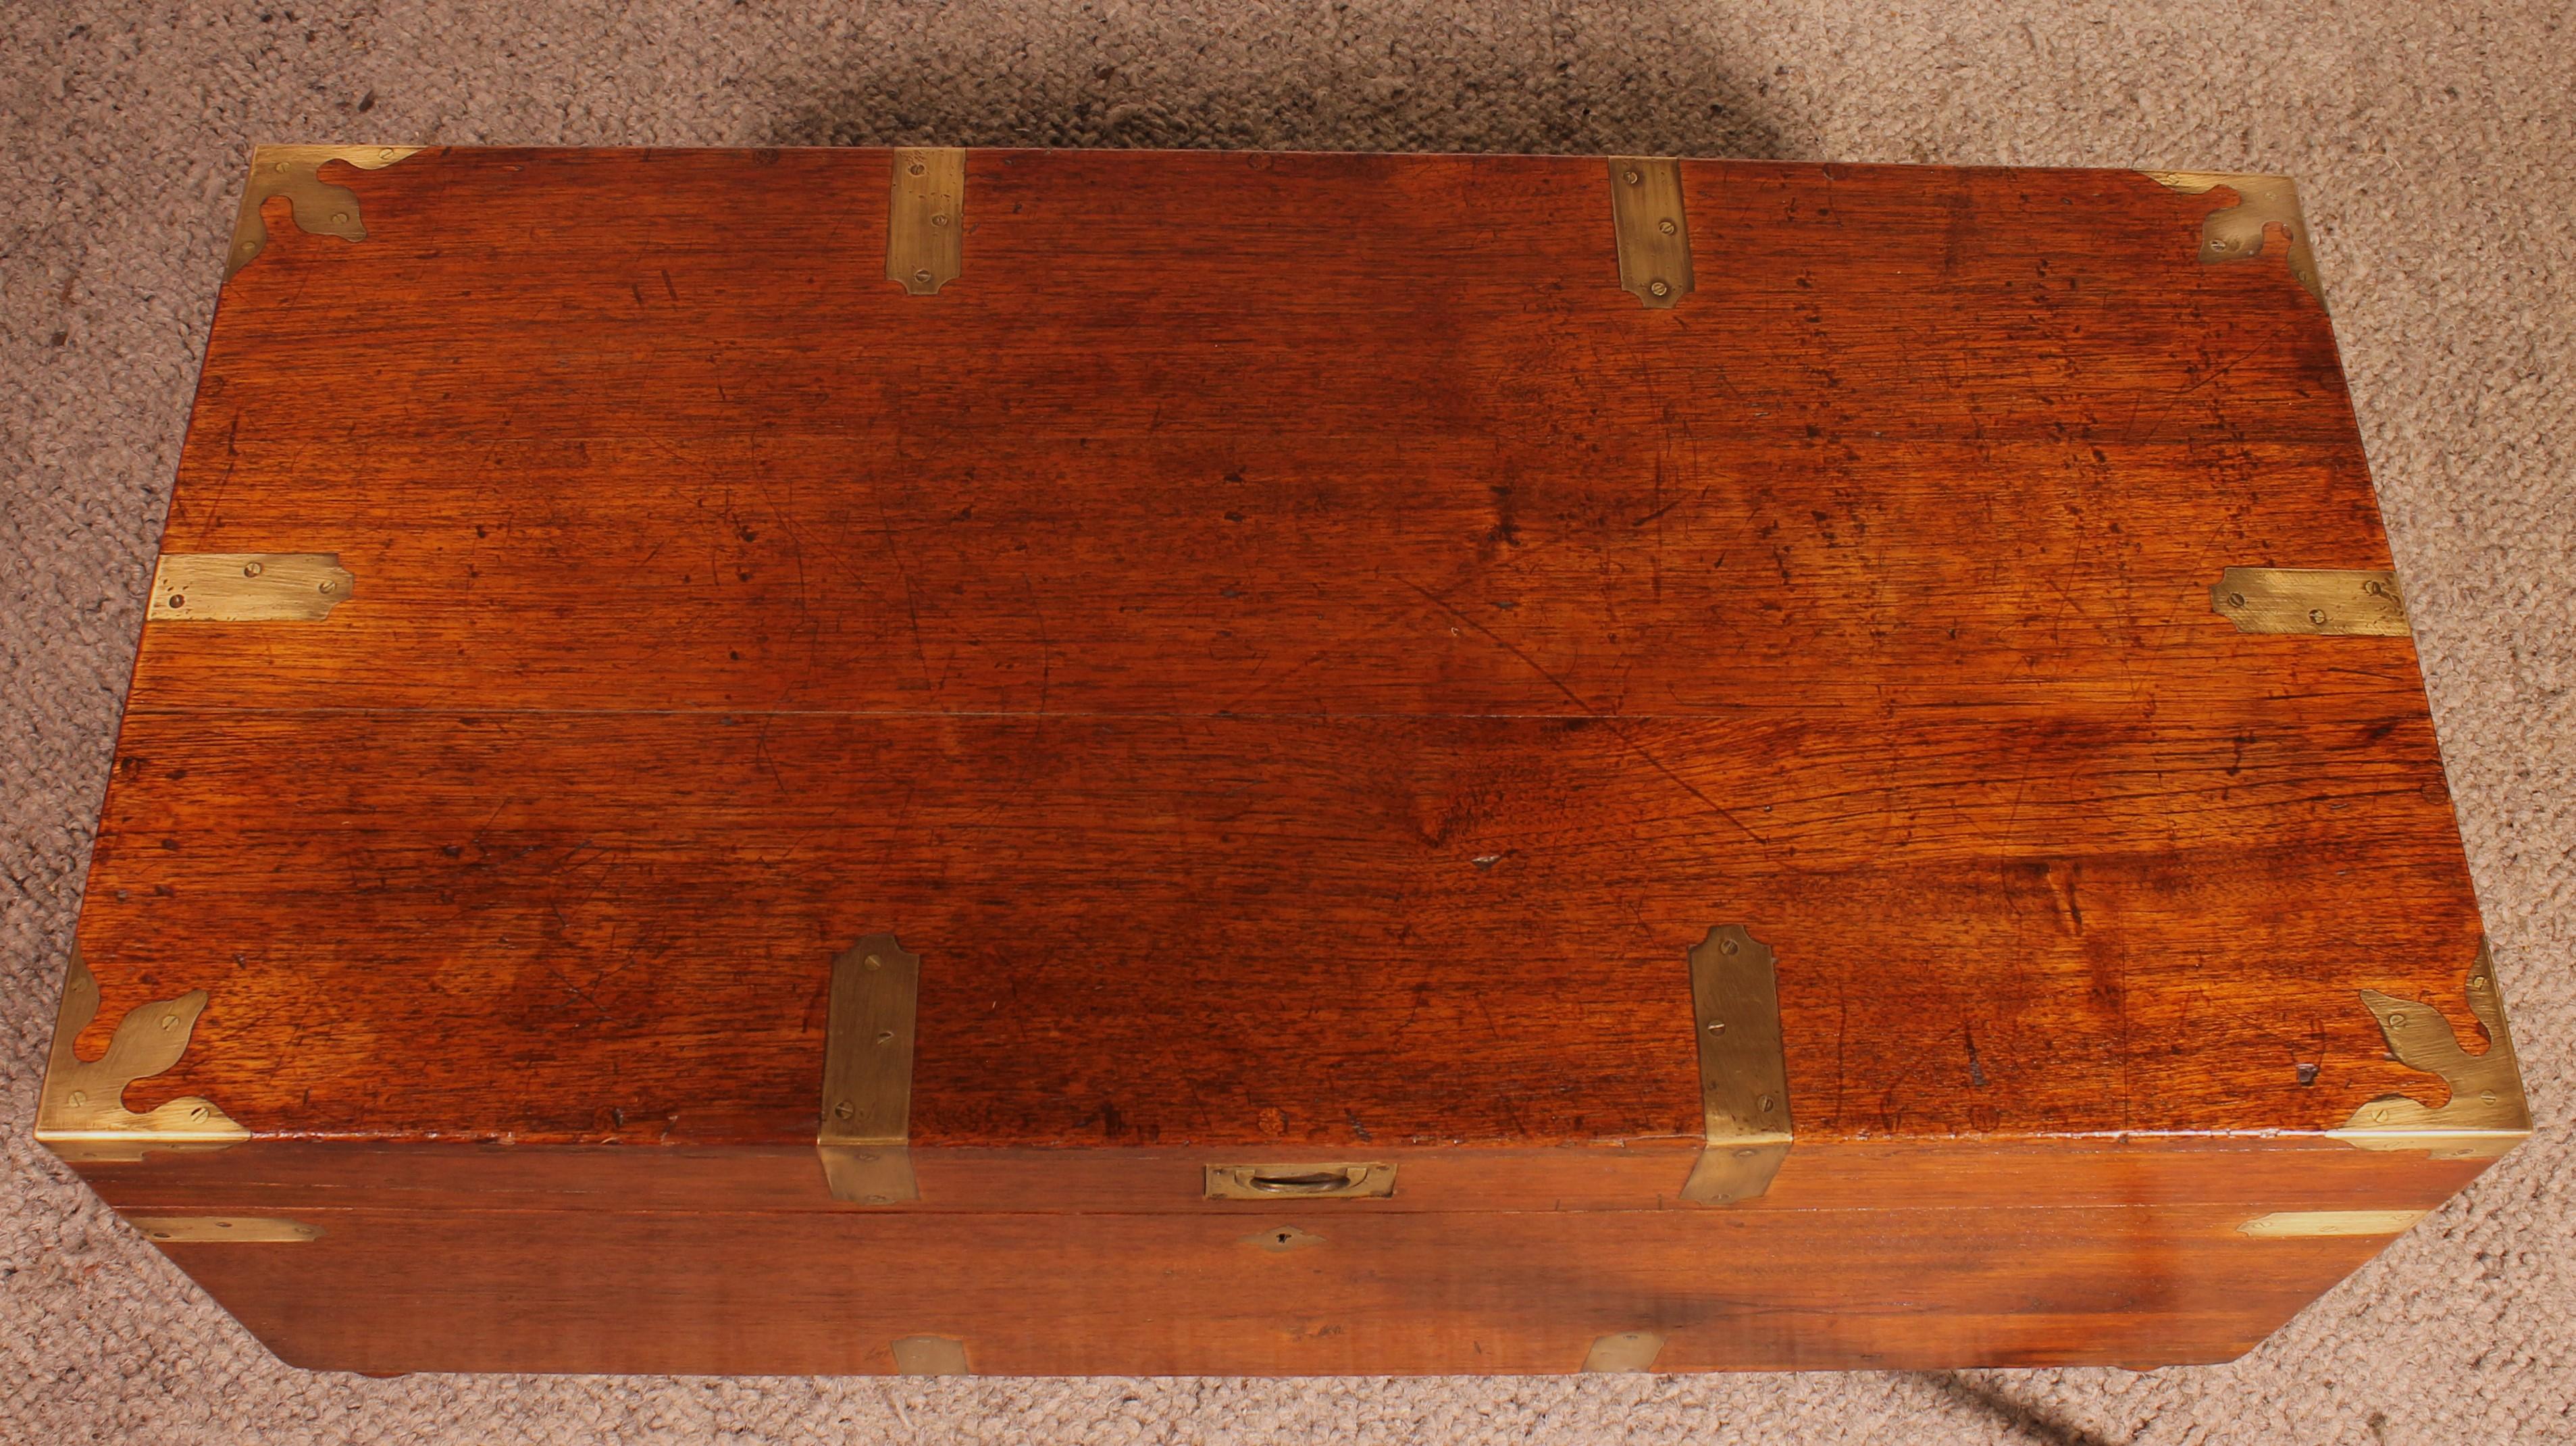 Teak Campaign Or Marine Chest From The 19th Century 3